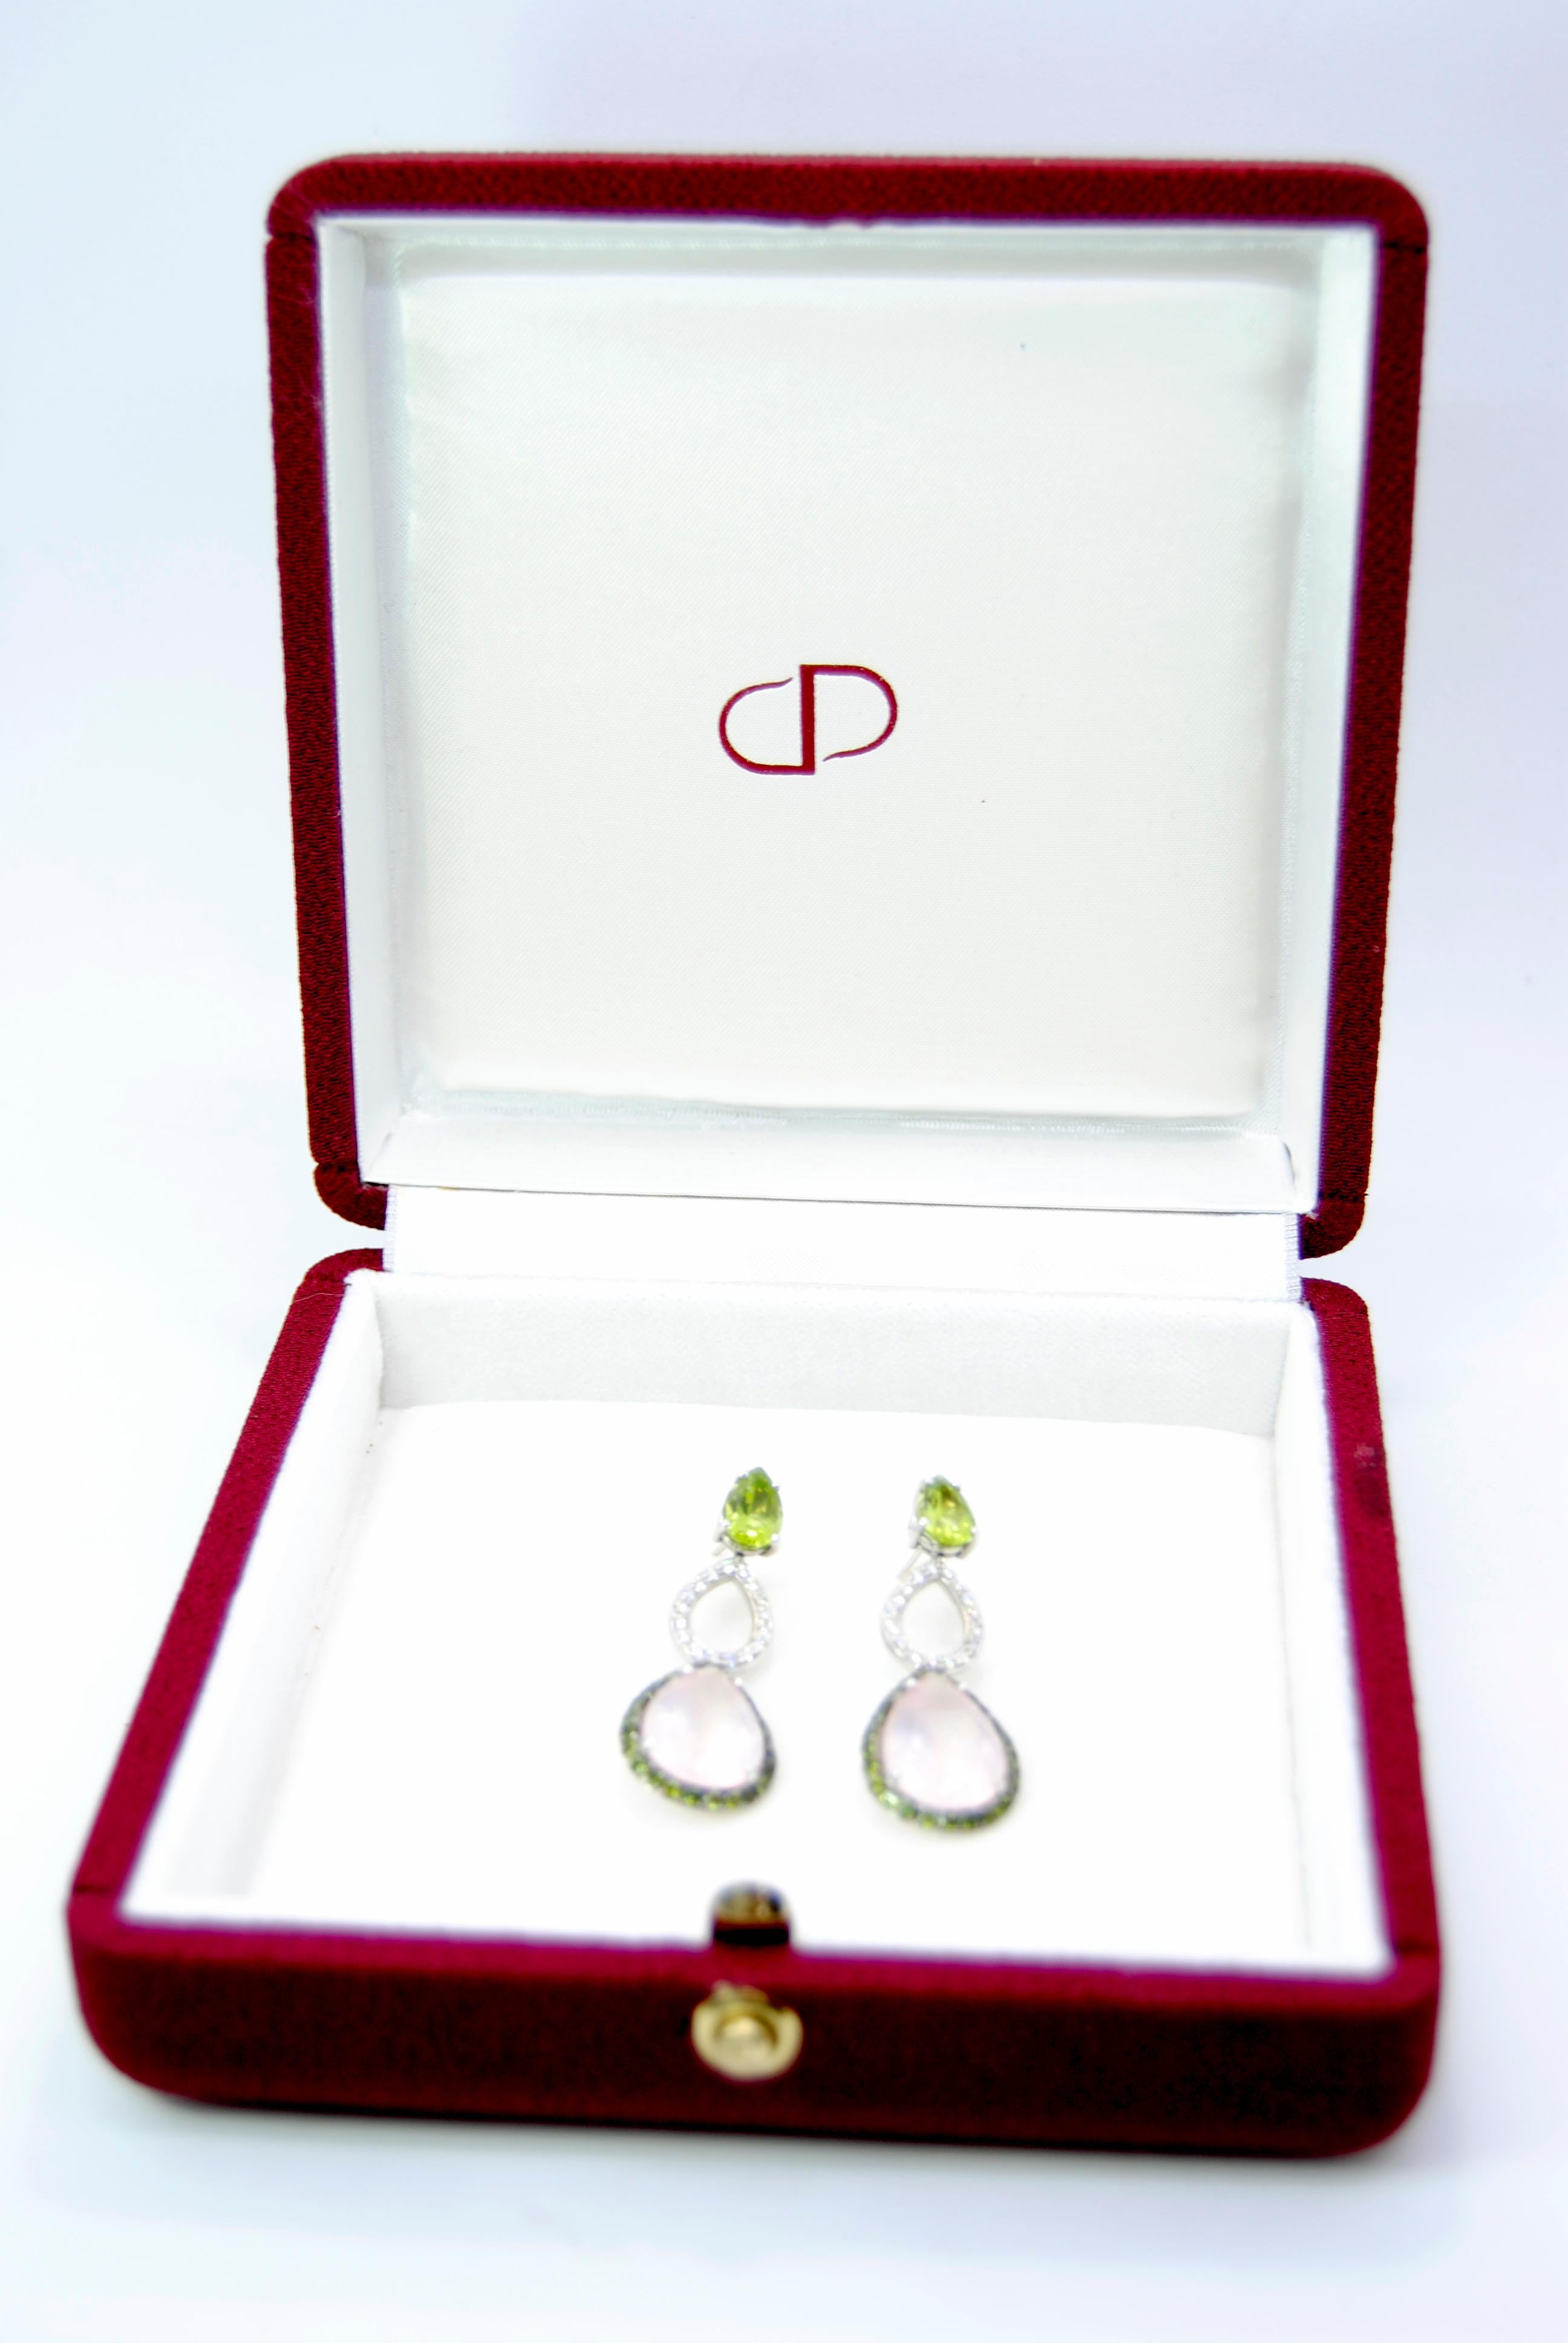 Contemporary Mangiarotti 18 Karat White Gold, Brights and Stones Earrings For Sale